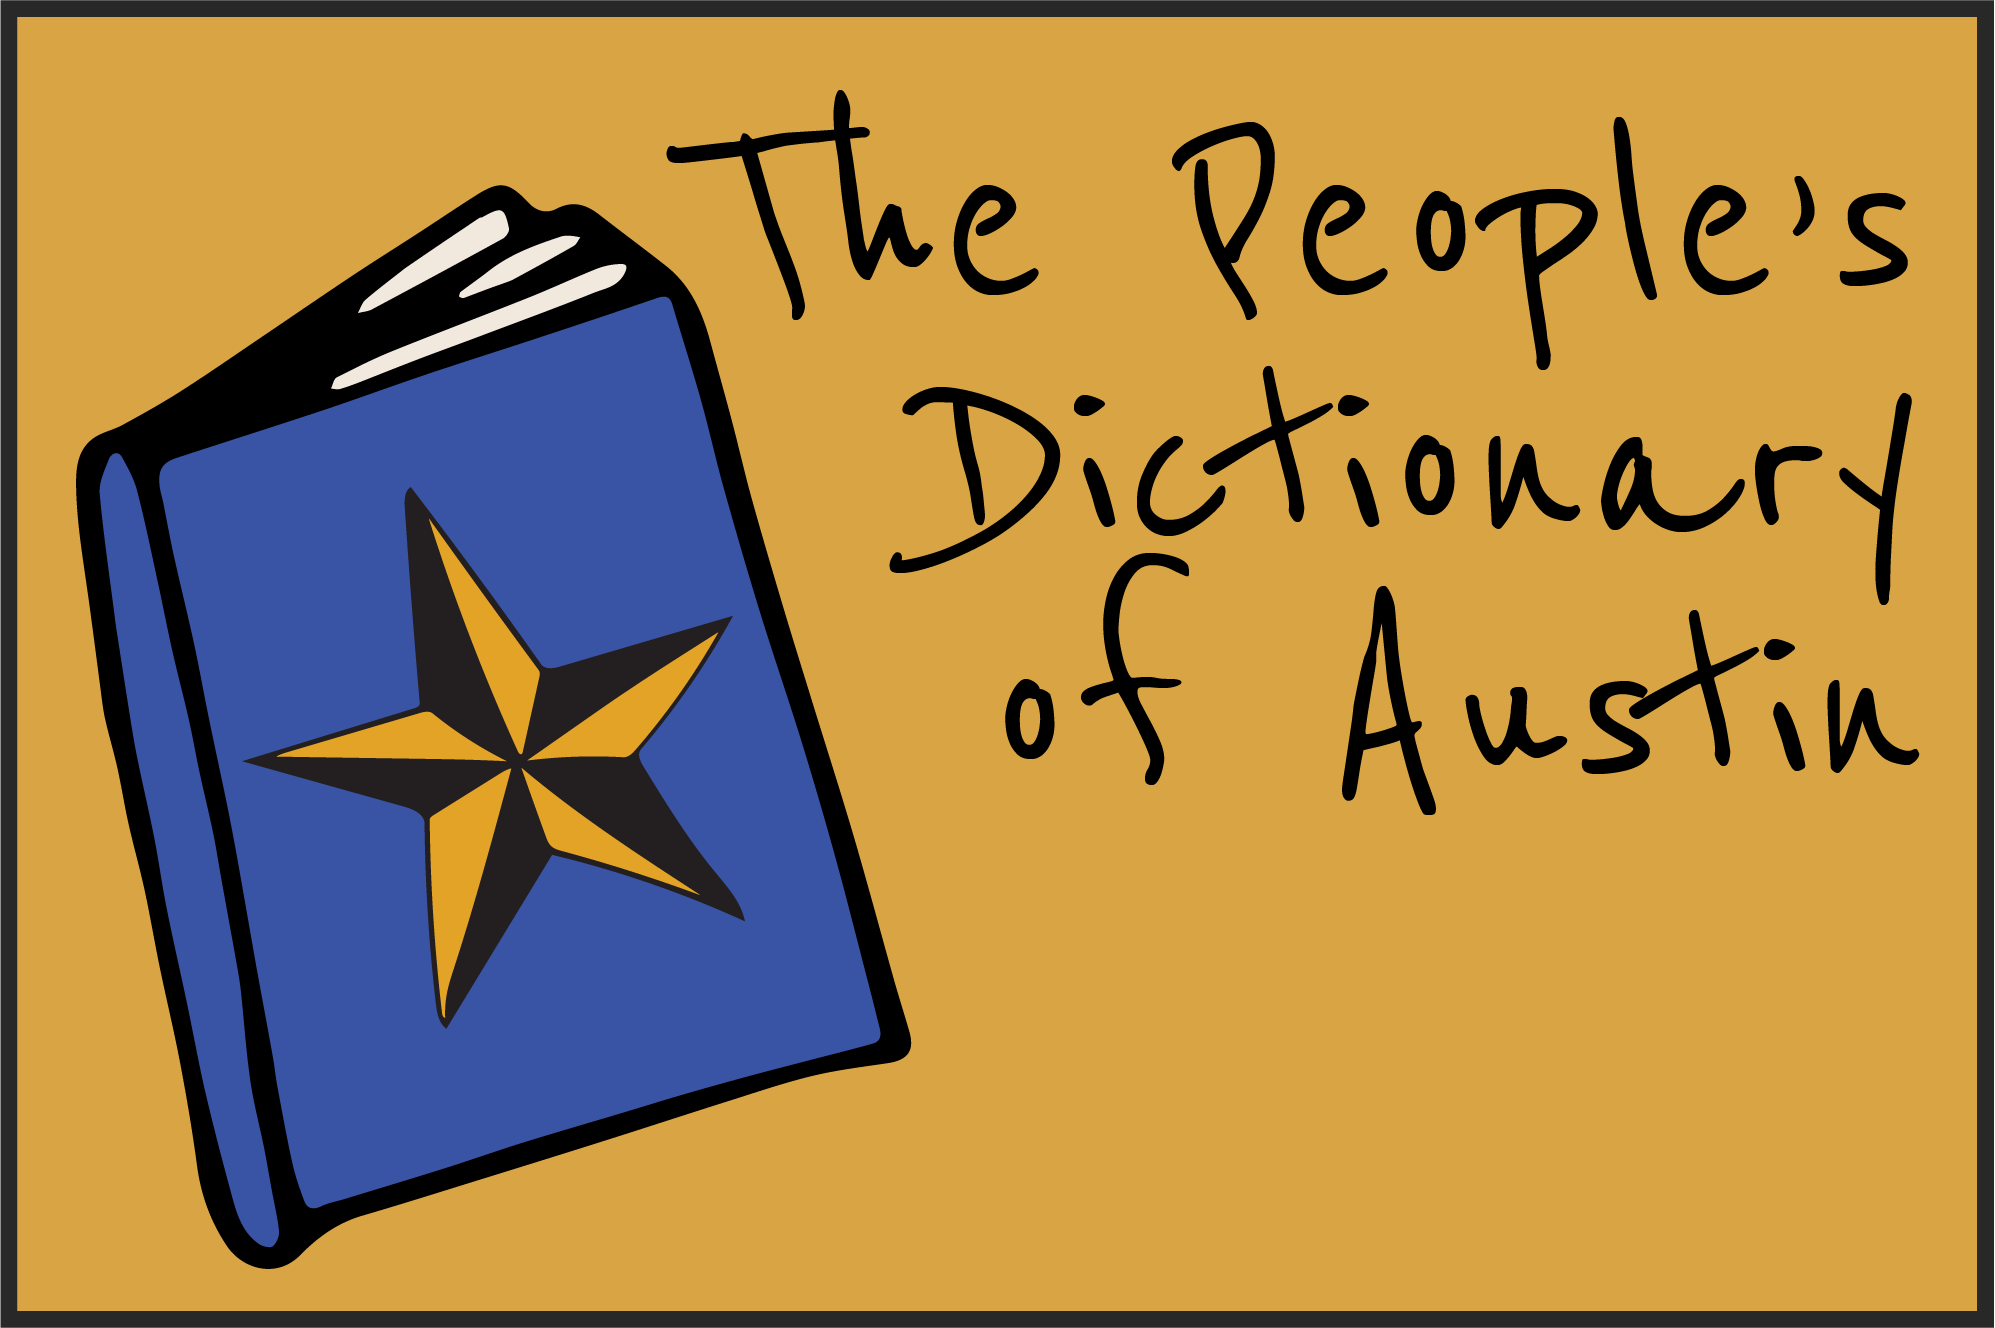 The People's Dictionary of Austin